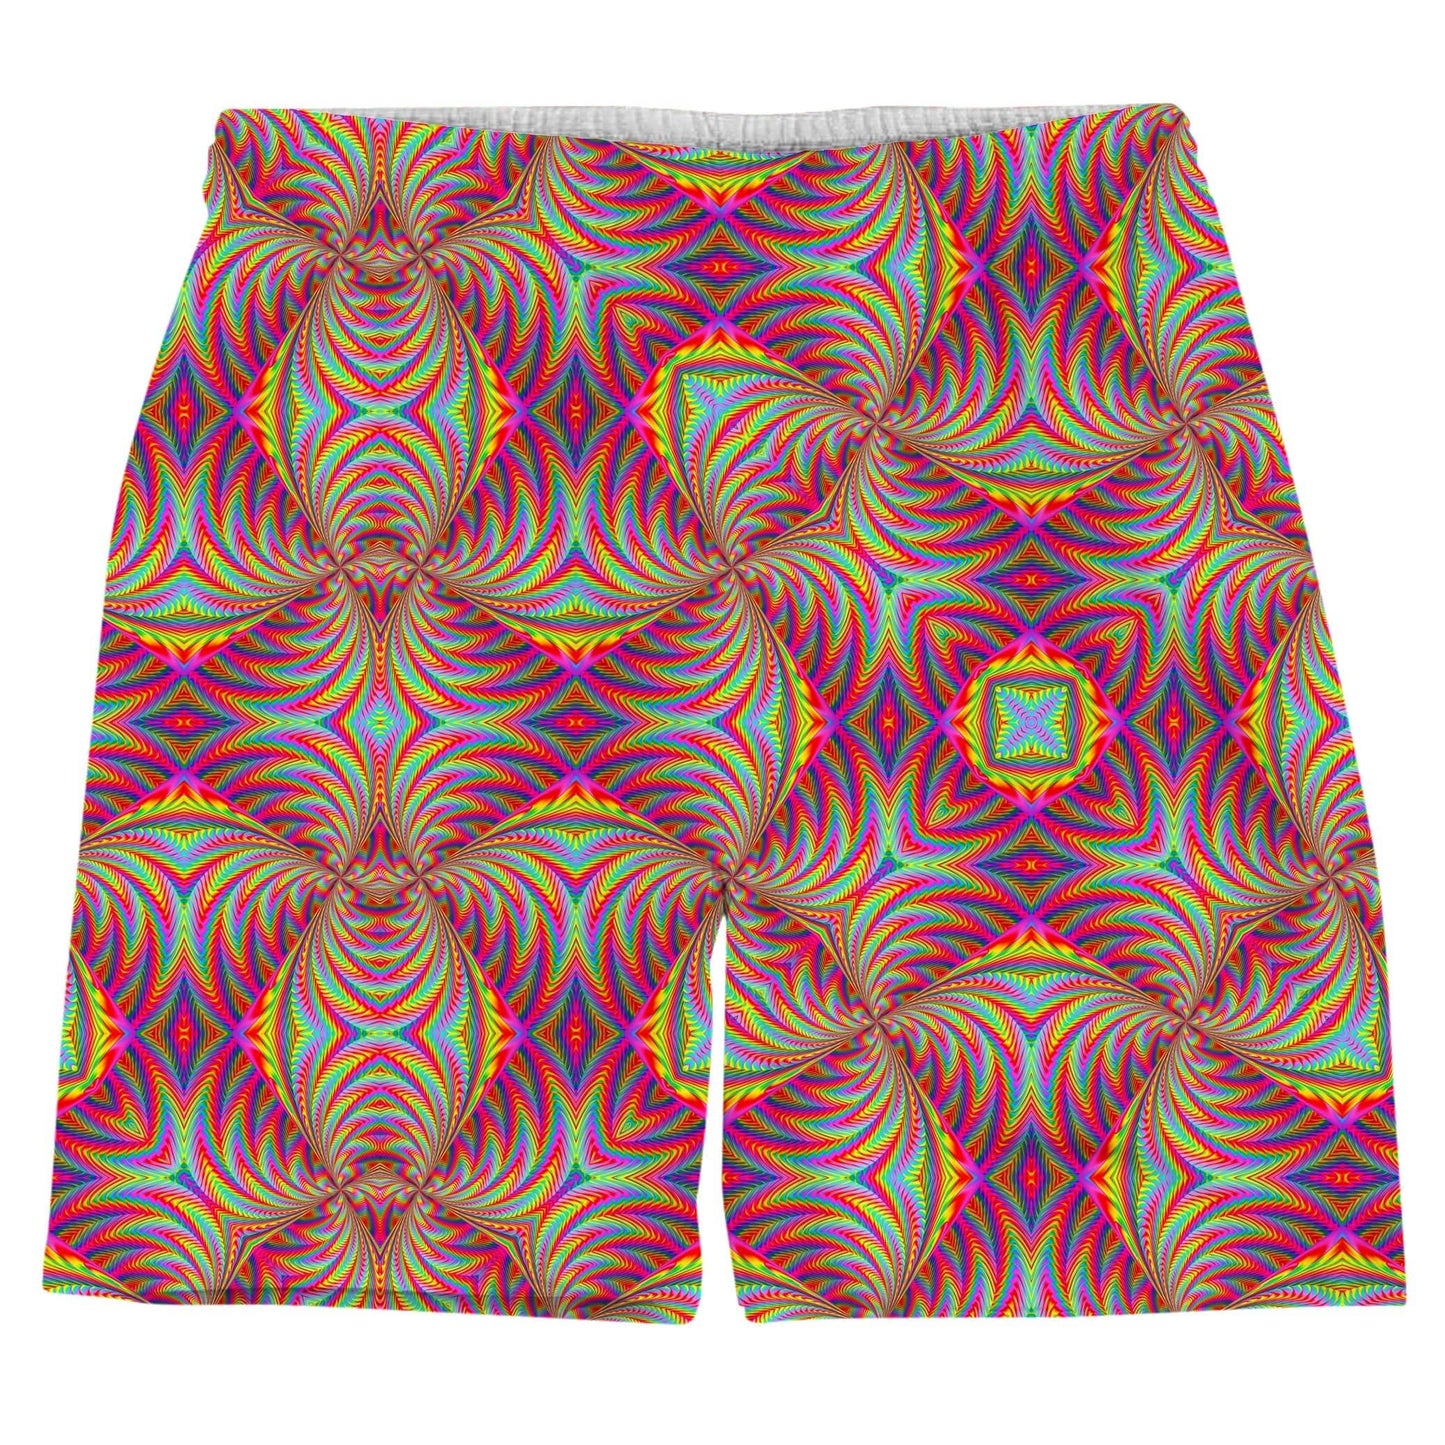 All The Faves T-Shirt and Shorts Combo, Art Design Works, | iEDM